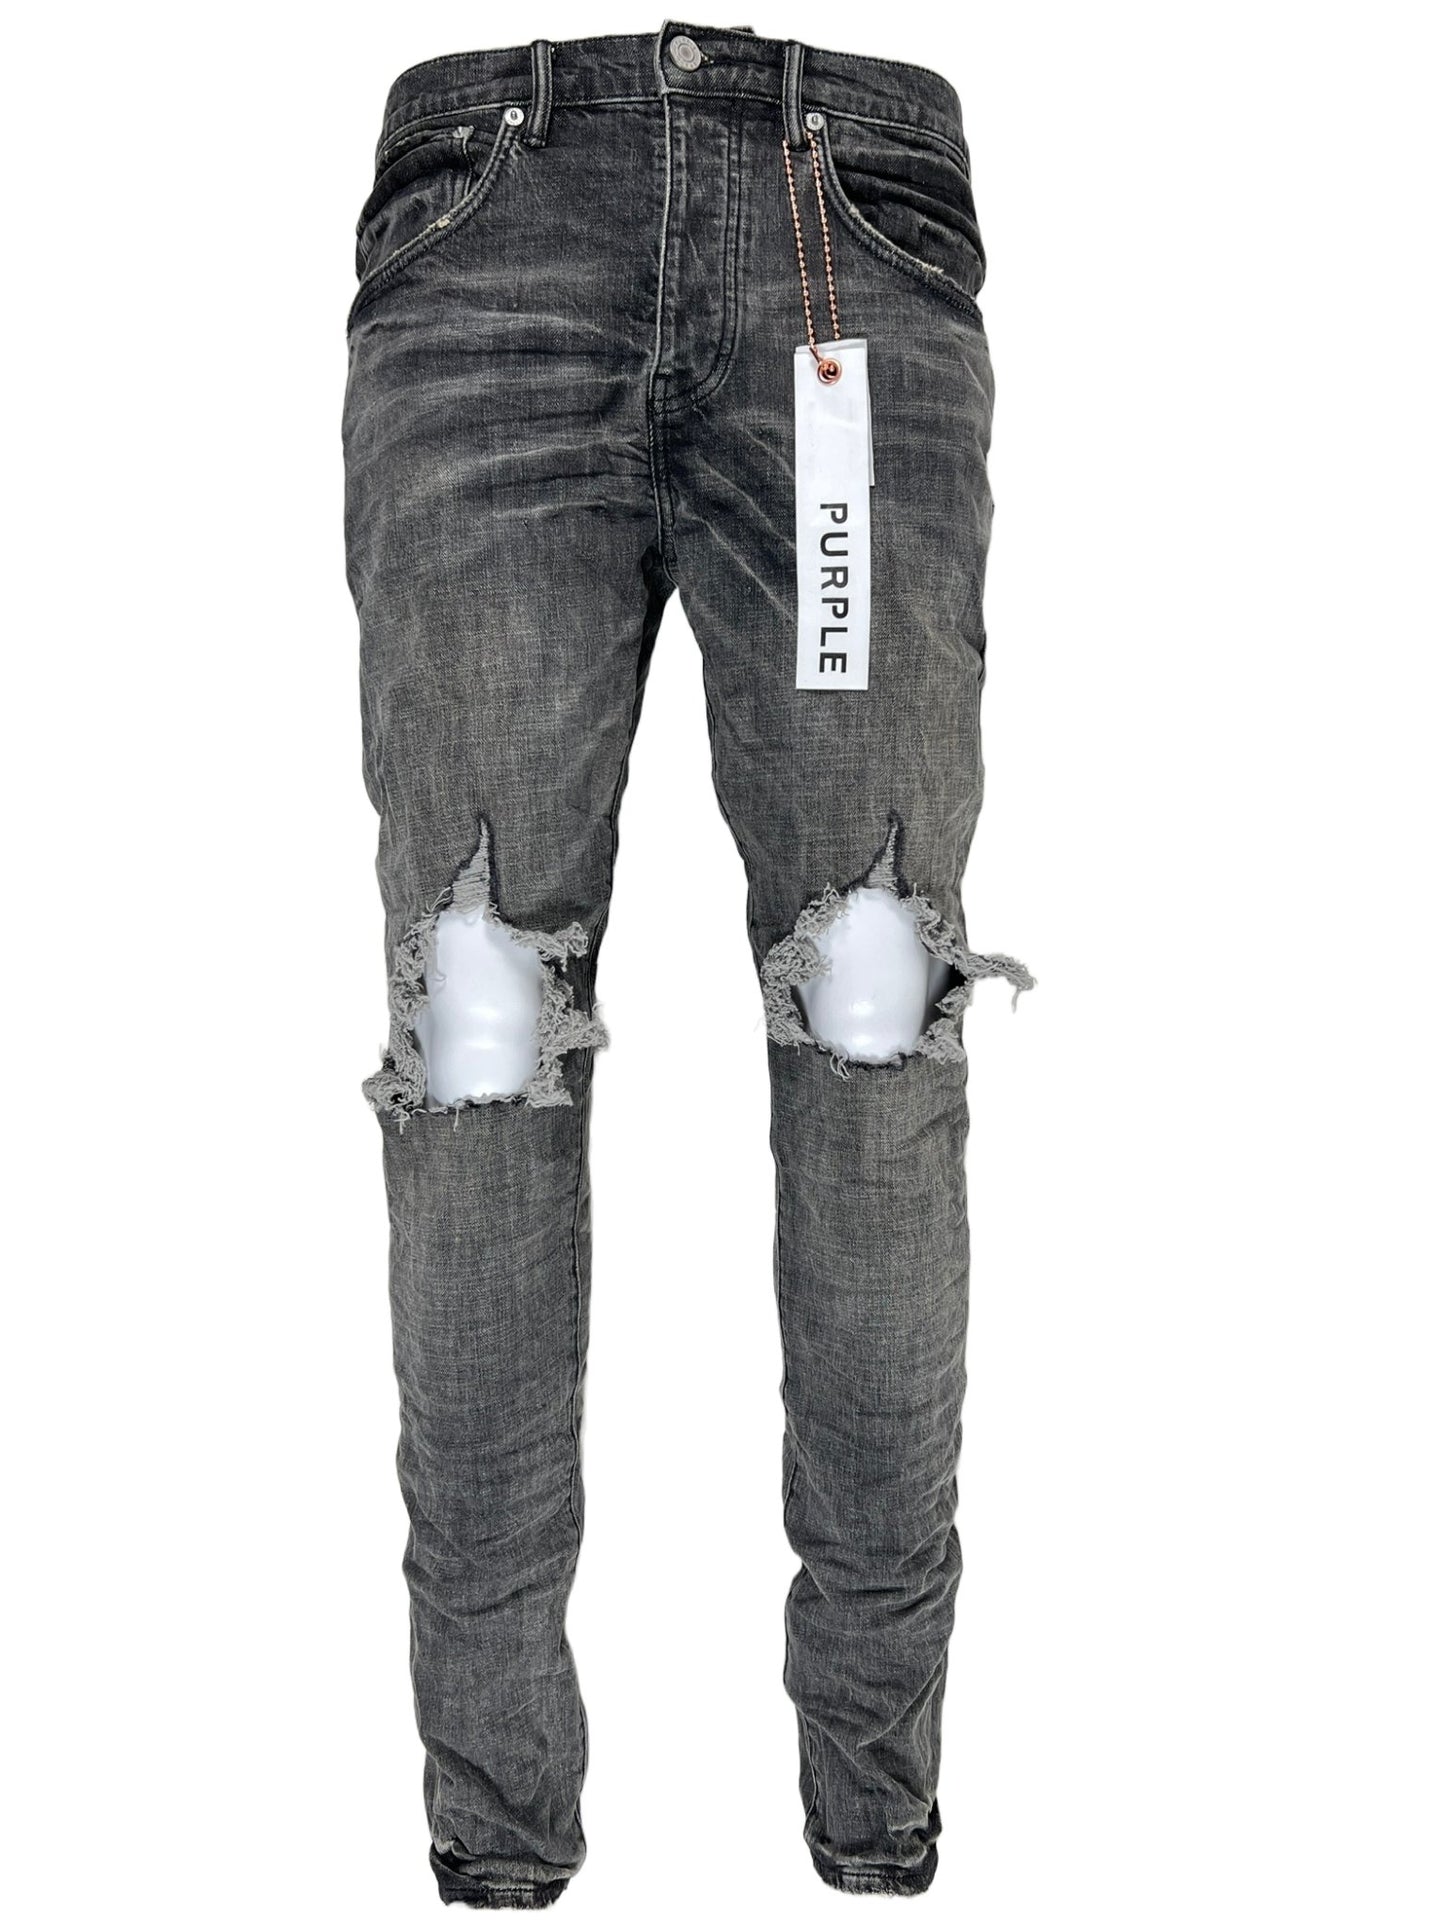 COPY - Purple brand jeans brand new with tags attached deep distressed grey  p-0…